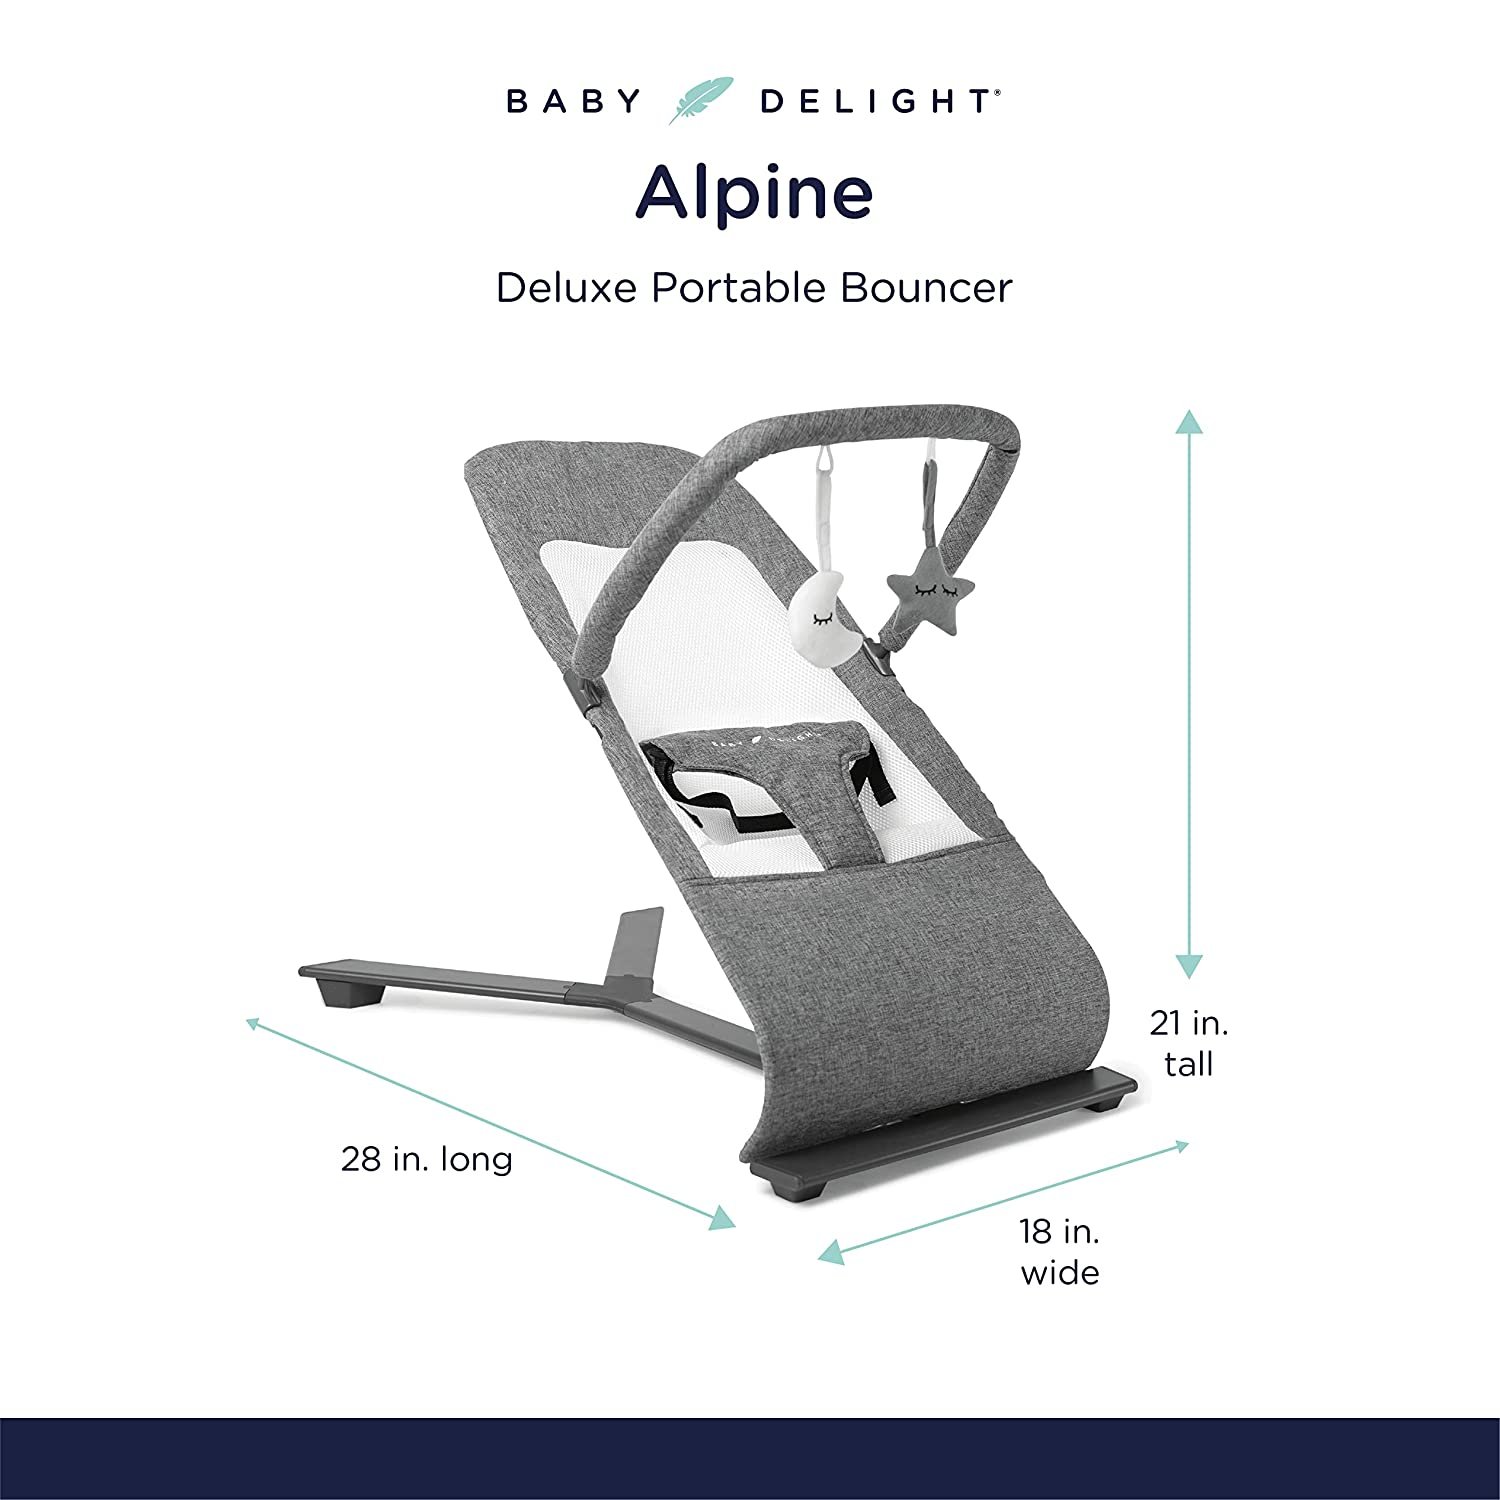 Baby Delight Alpine Deluxe Portable Bouncer, Infant, 0 â�� 6 months, Charcoal Tweed